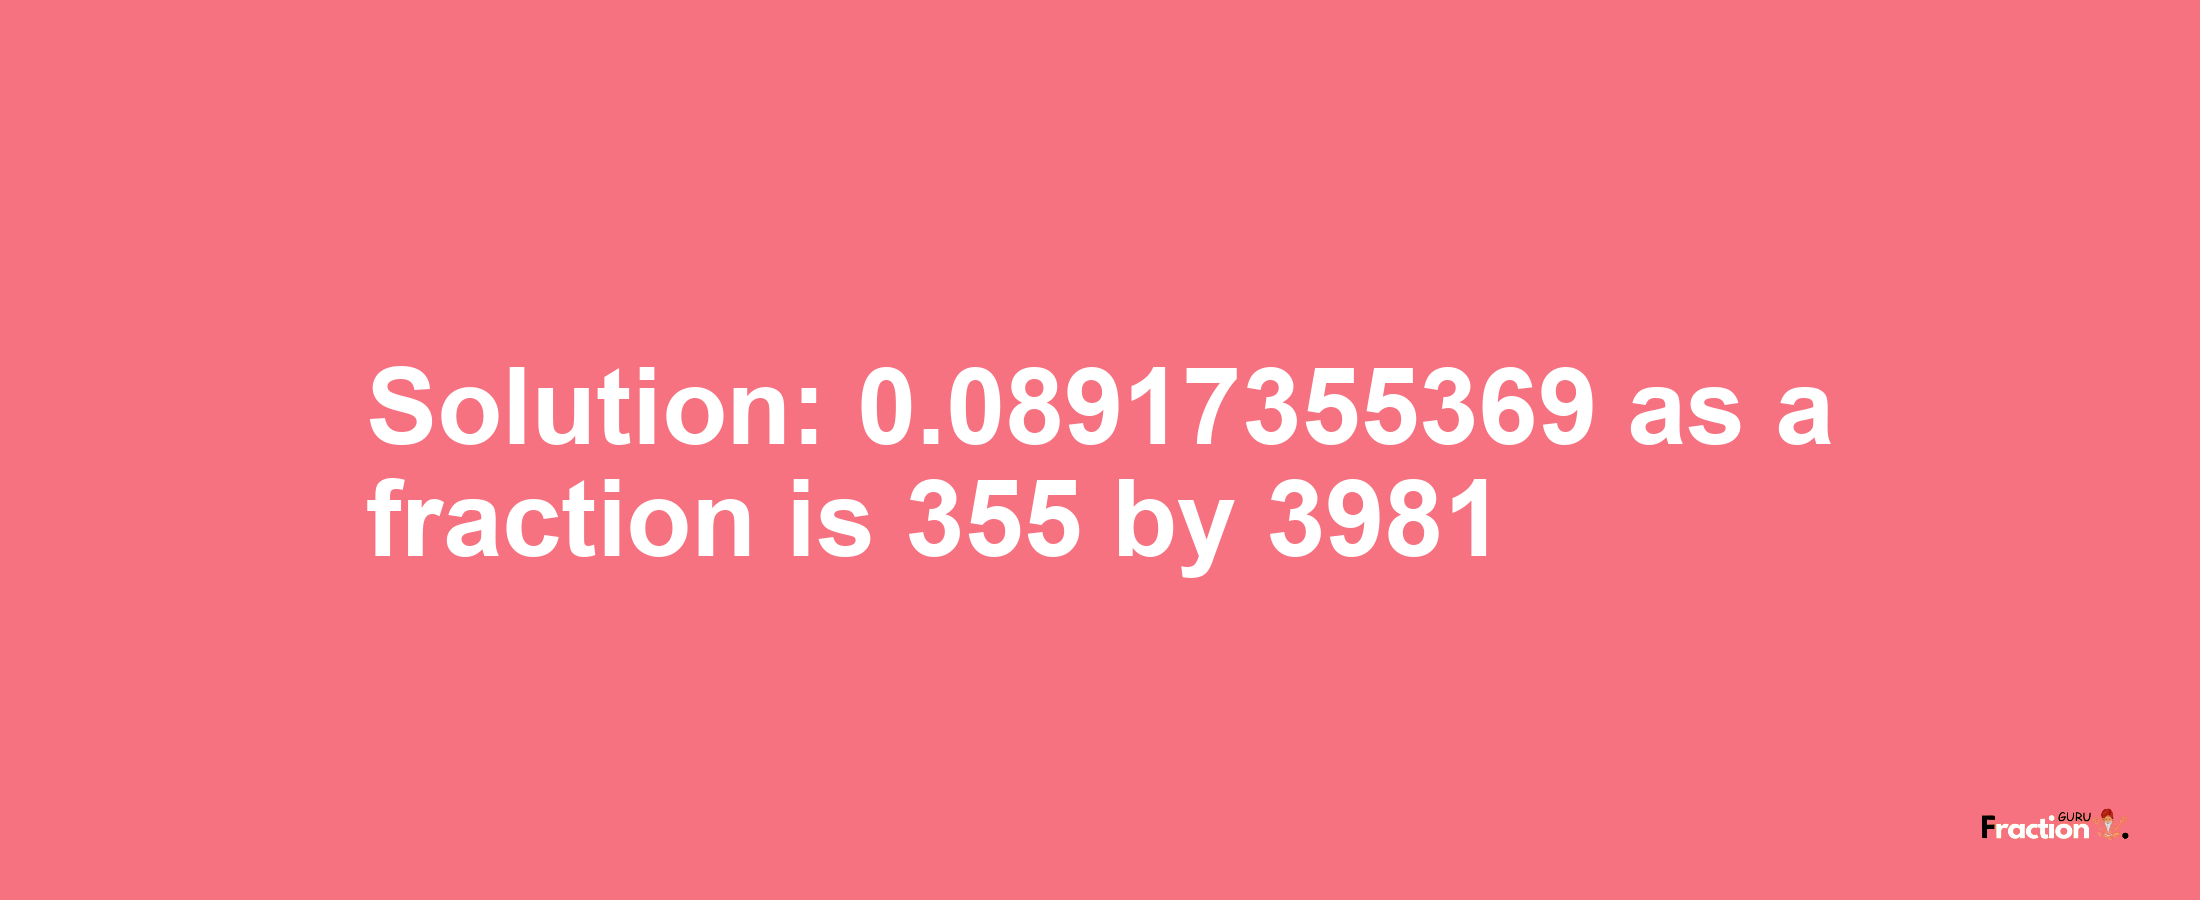 Solution:0.08917355369 as a fraction is 355/3981